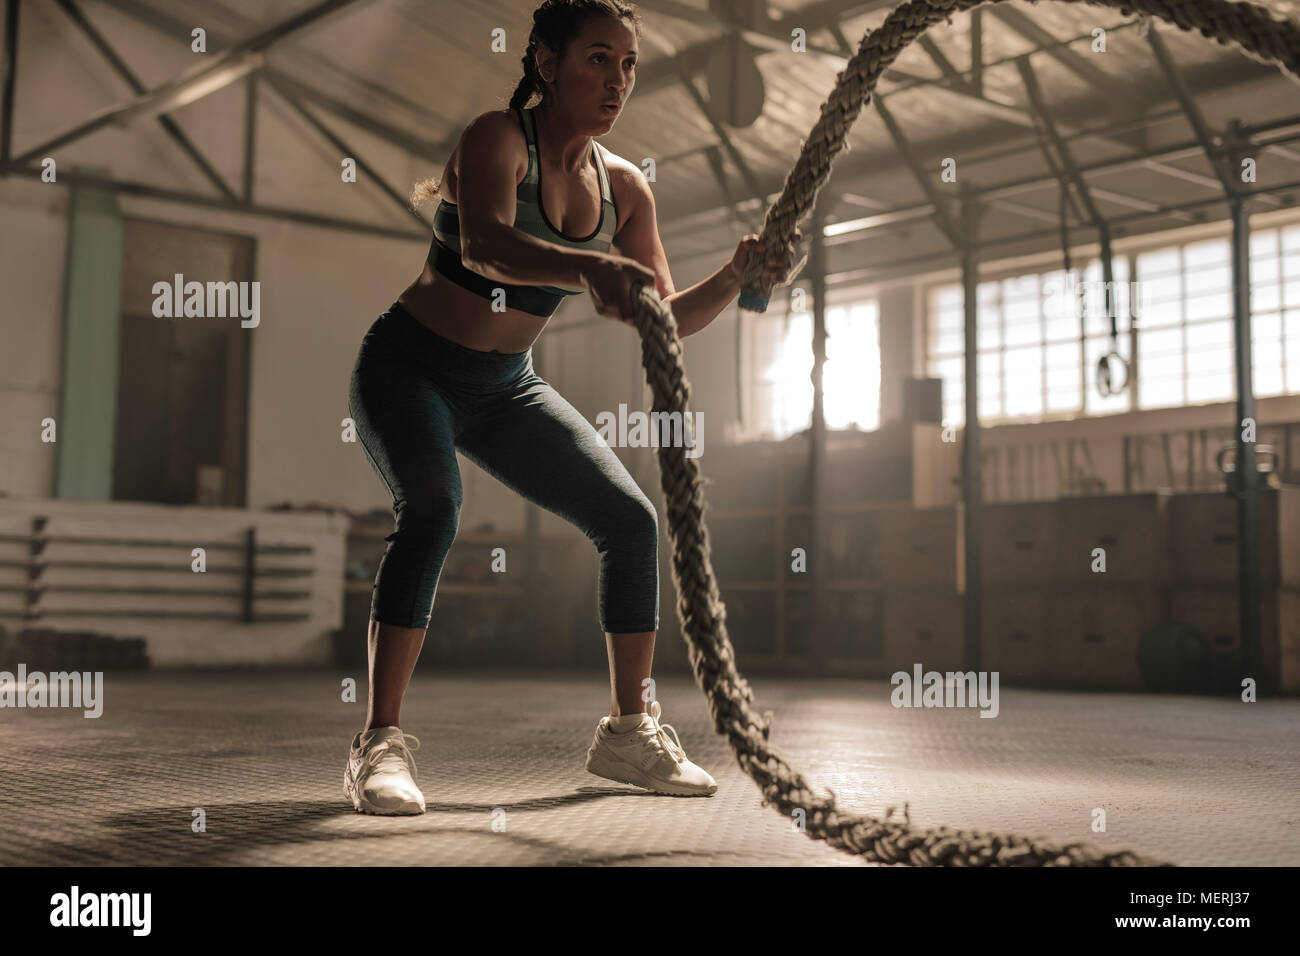 Young woman doing strength training using battle ropes at the gym. Athlete moving the ropes in wave motion as part of fat burning workout. Stock Photo